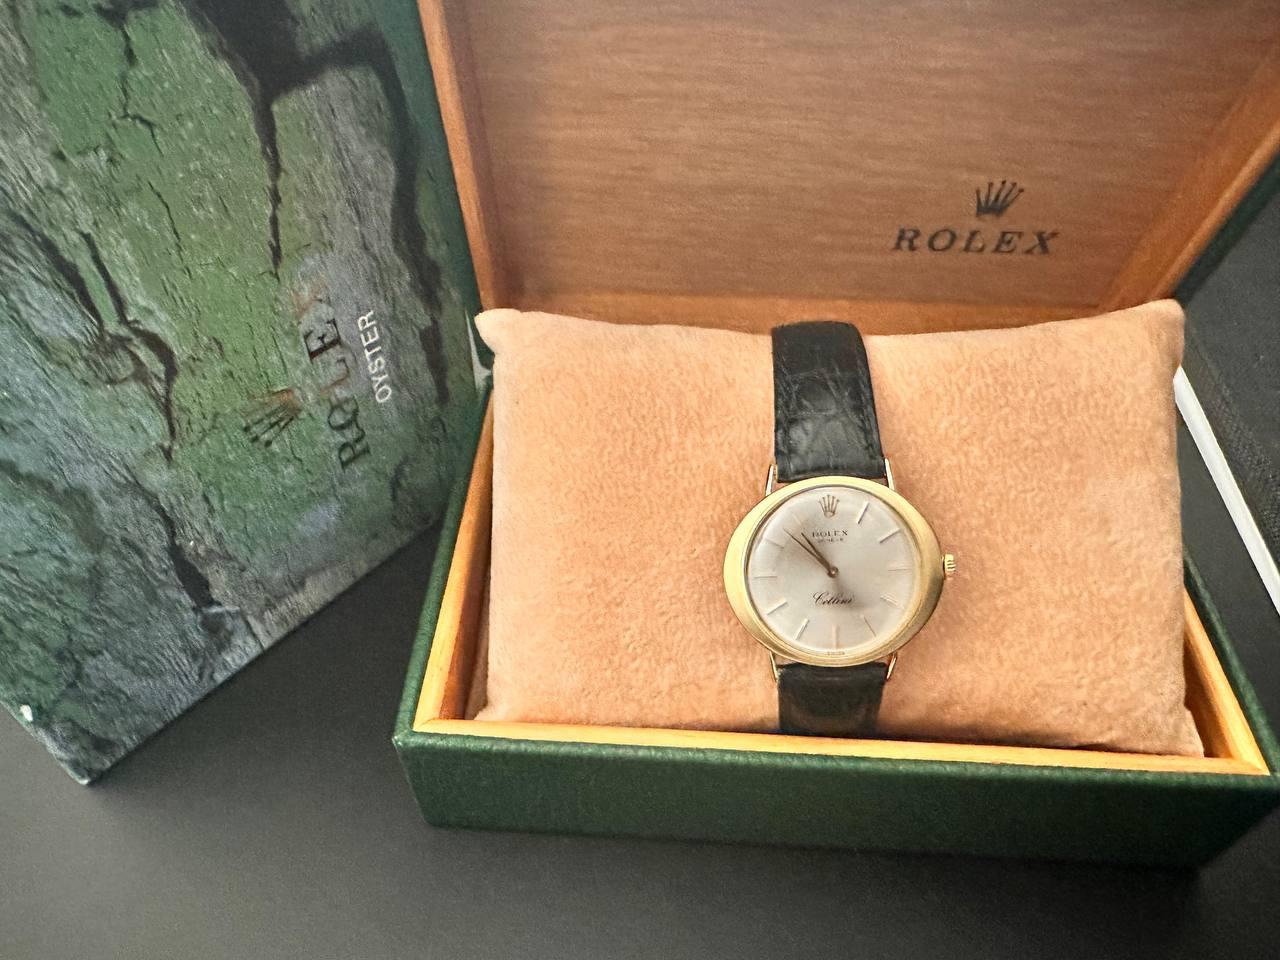 Rolex Cellini model 
Diameter 32mm 
Manual movement
Yellow gold material and black leather strap 
Oval-shaped gray dial 
The watch comes with the original box 
1 year warranty from date of purchase for malfunction 